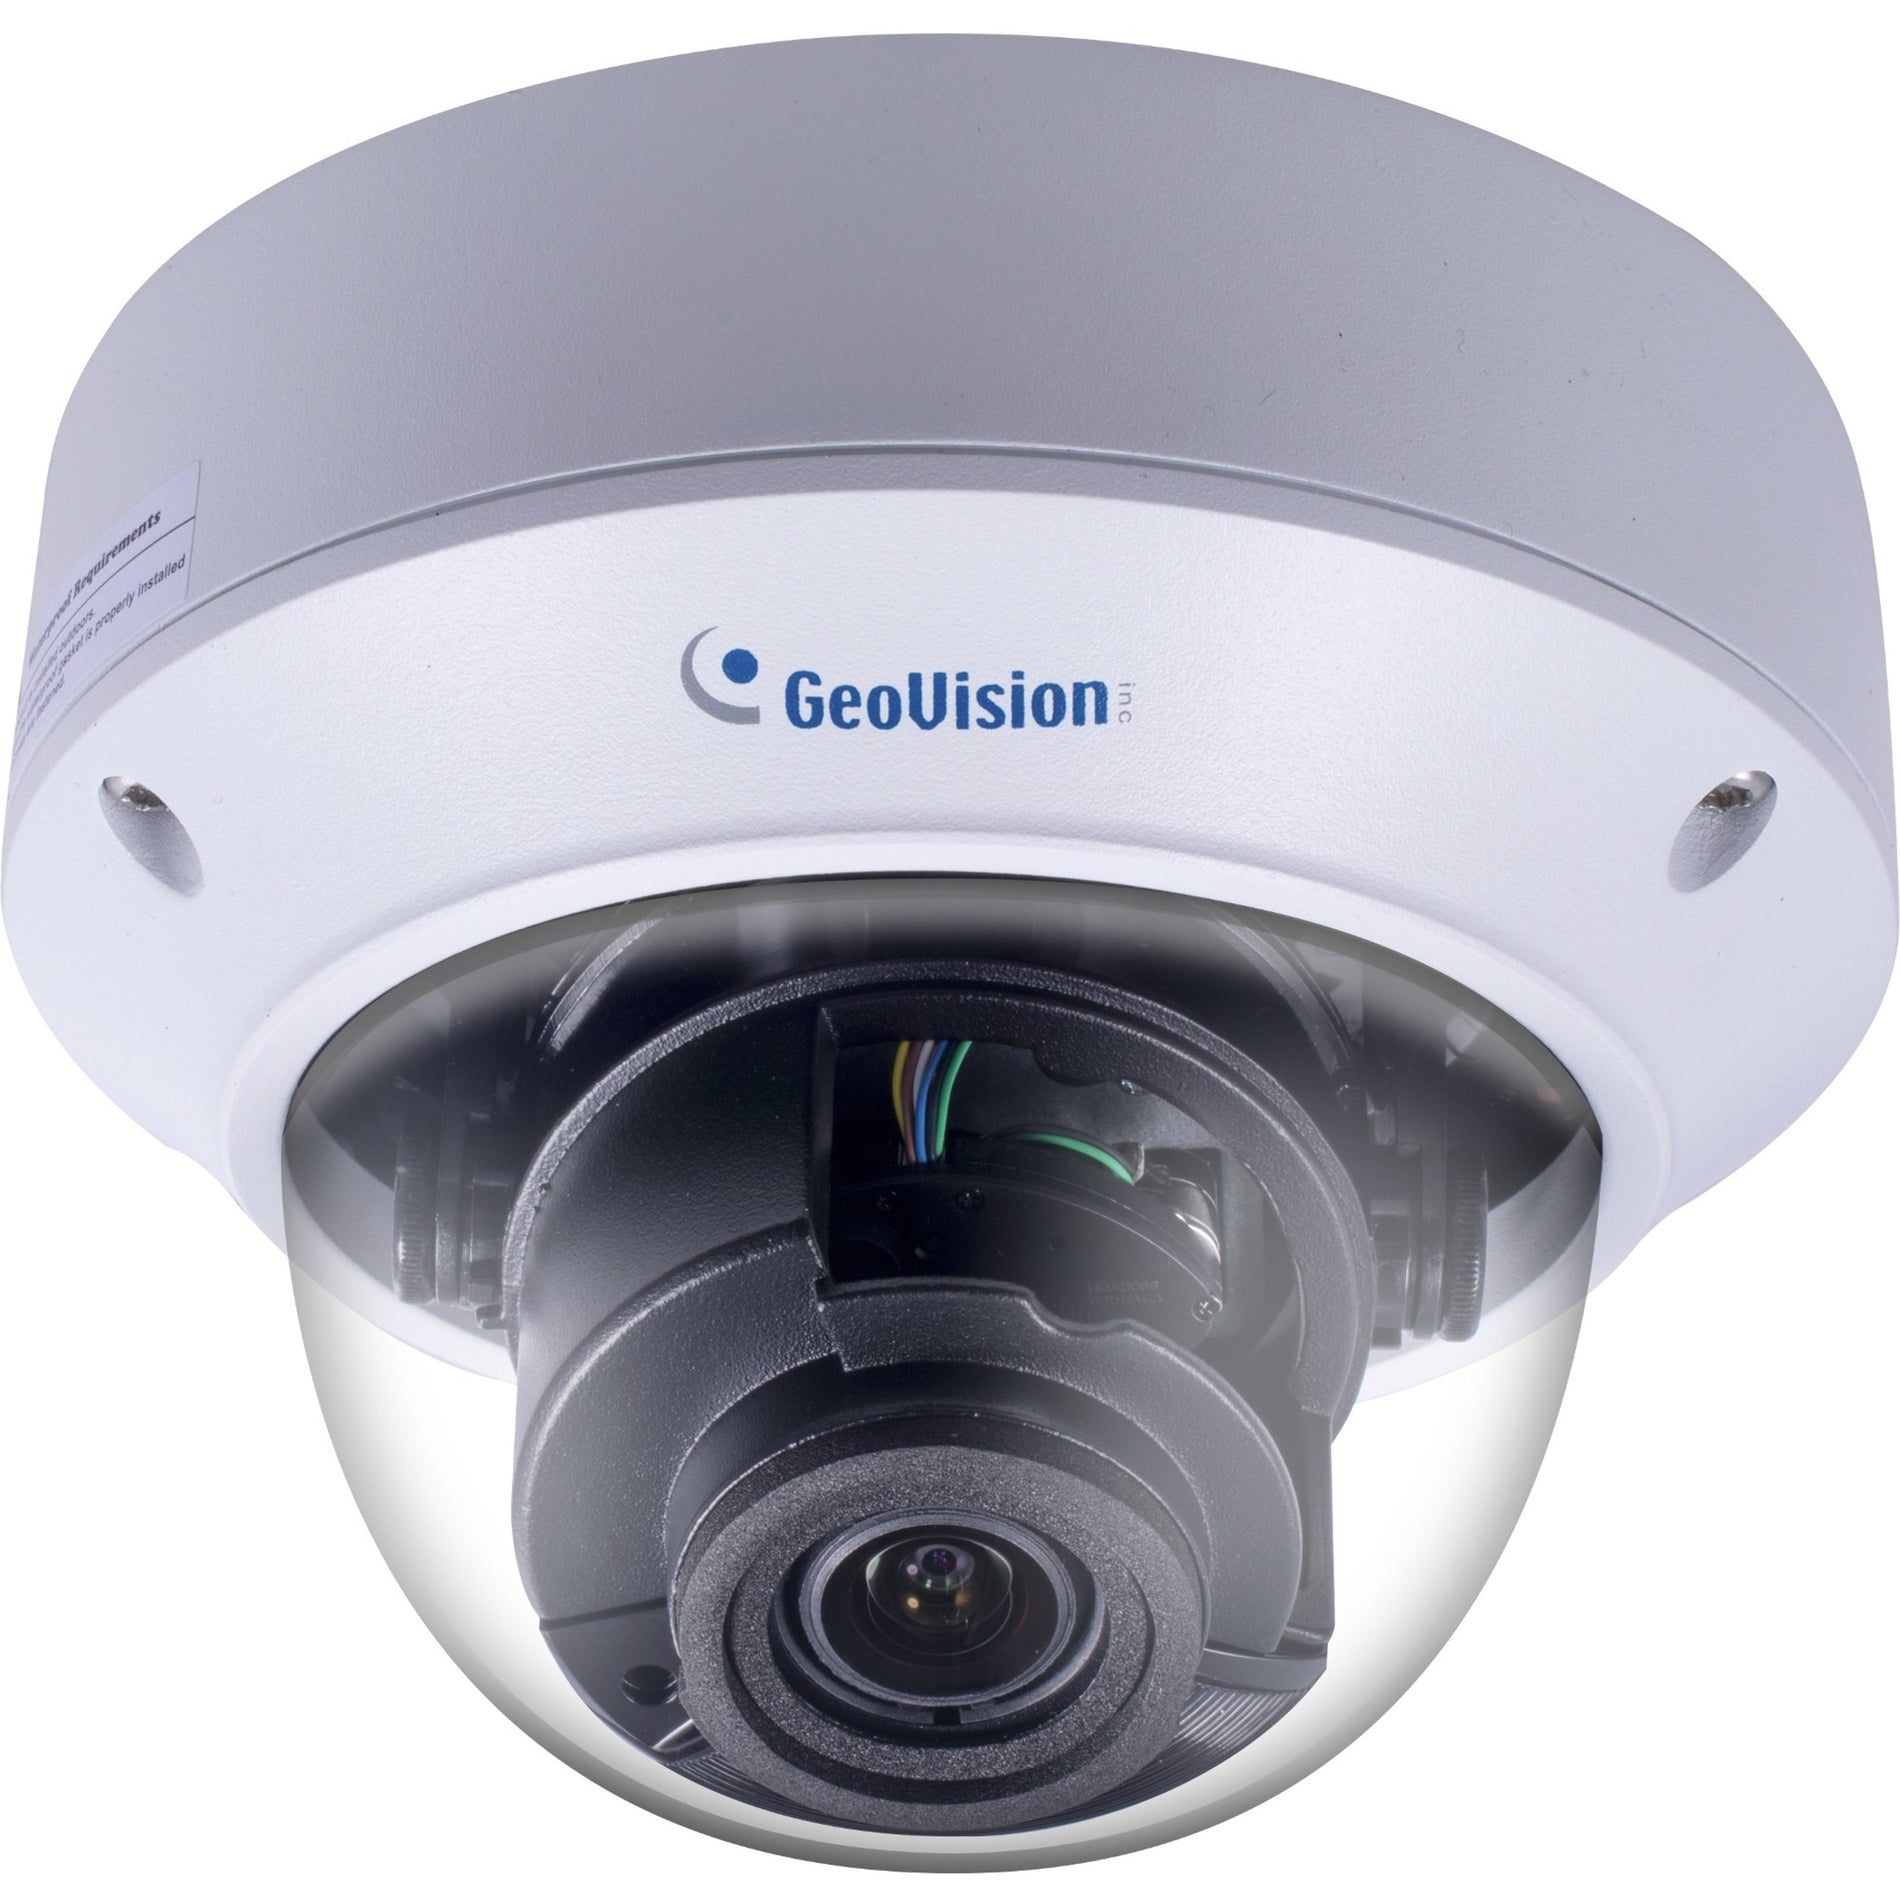 GeoVision GV-TVD8710 8MP H.265 4.3x Zoom Super Low Lux WDR Pro IR Vandal Proof IP Dome, 3840 x 2160, 24 Month Warranty